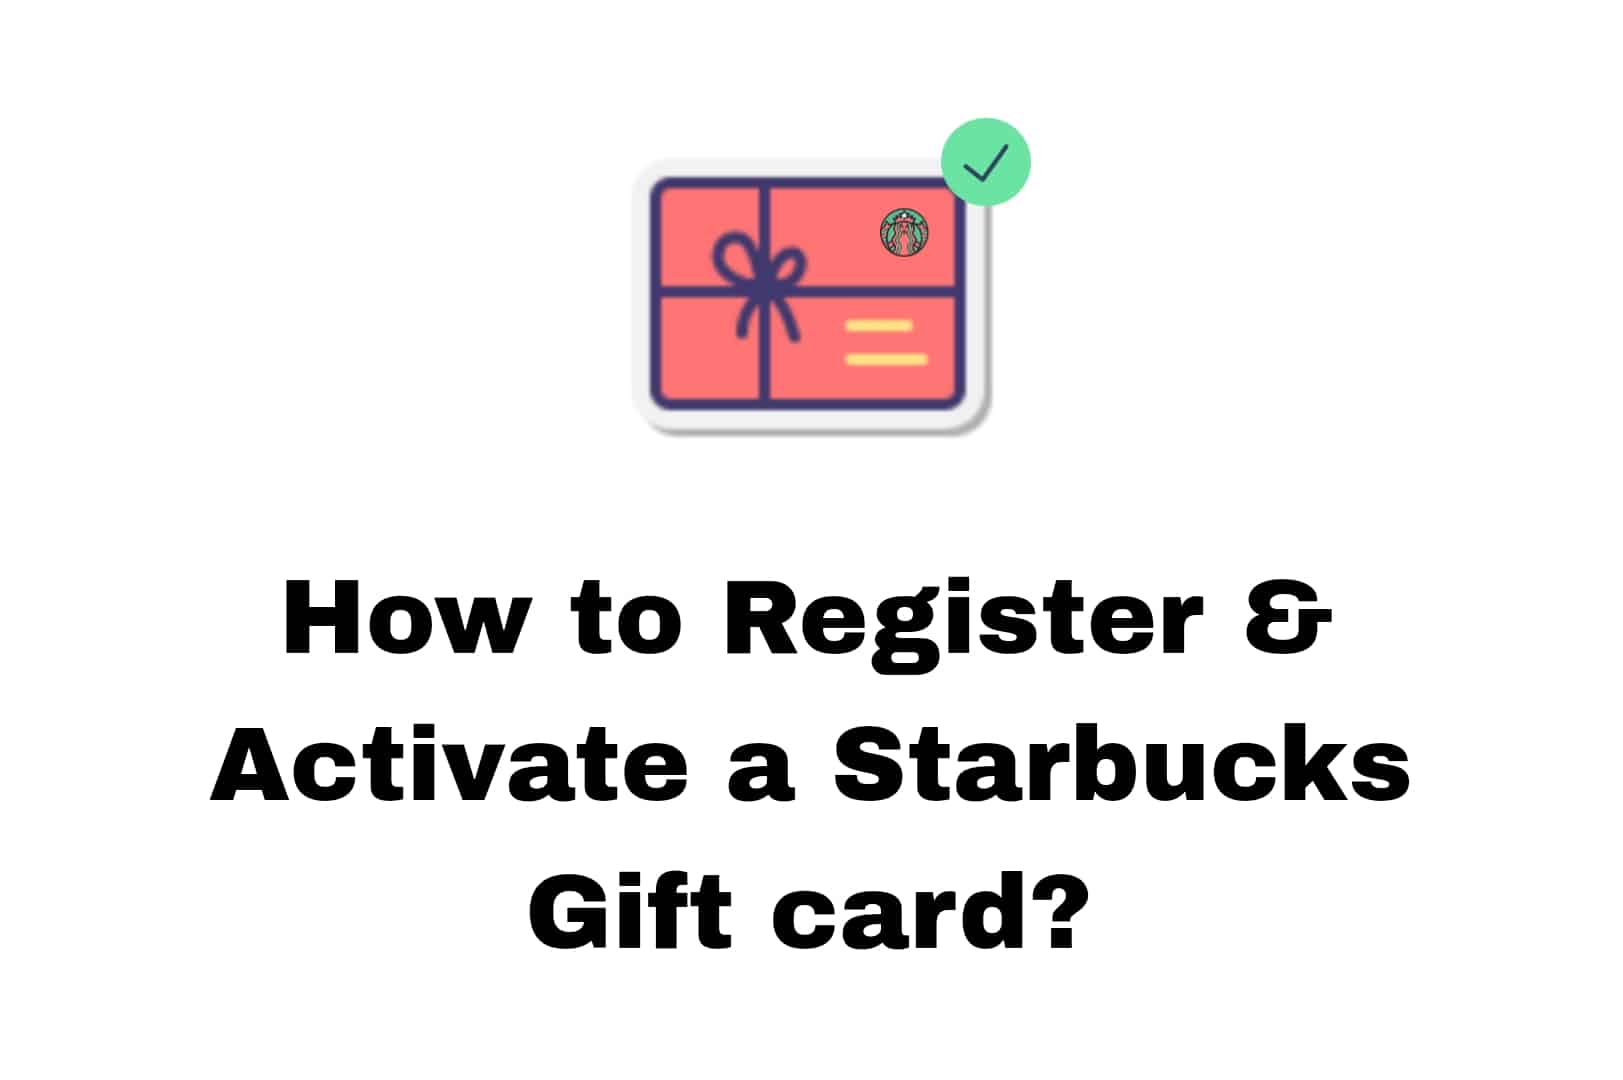 How to Register & Activate a Starbucks Gift card?